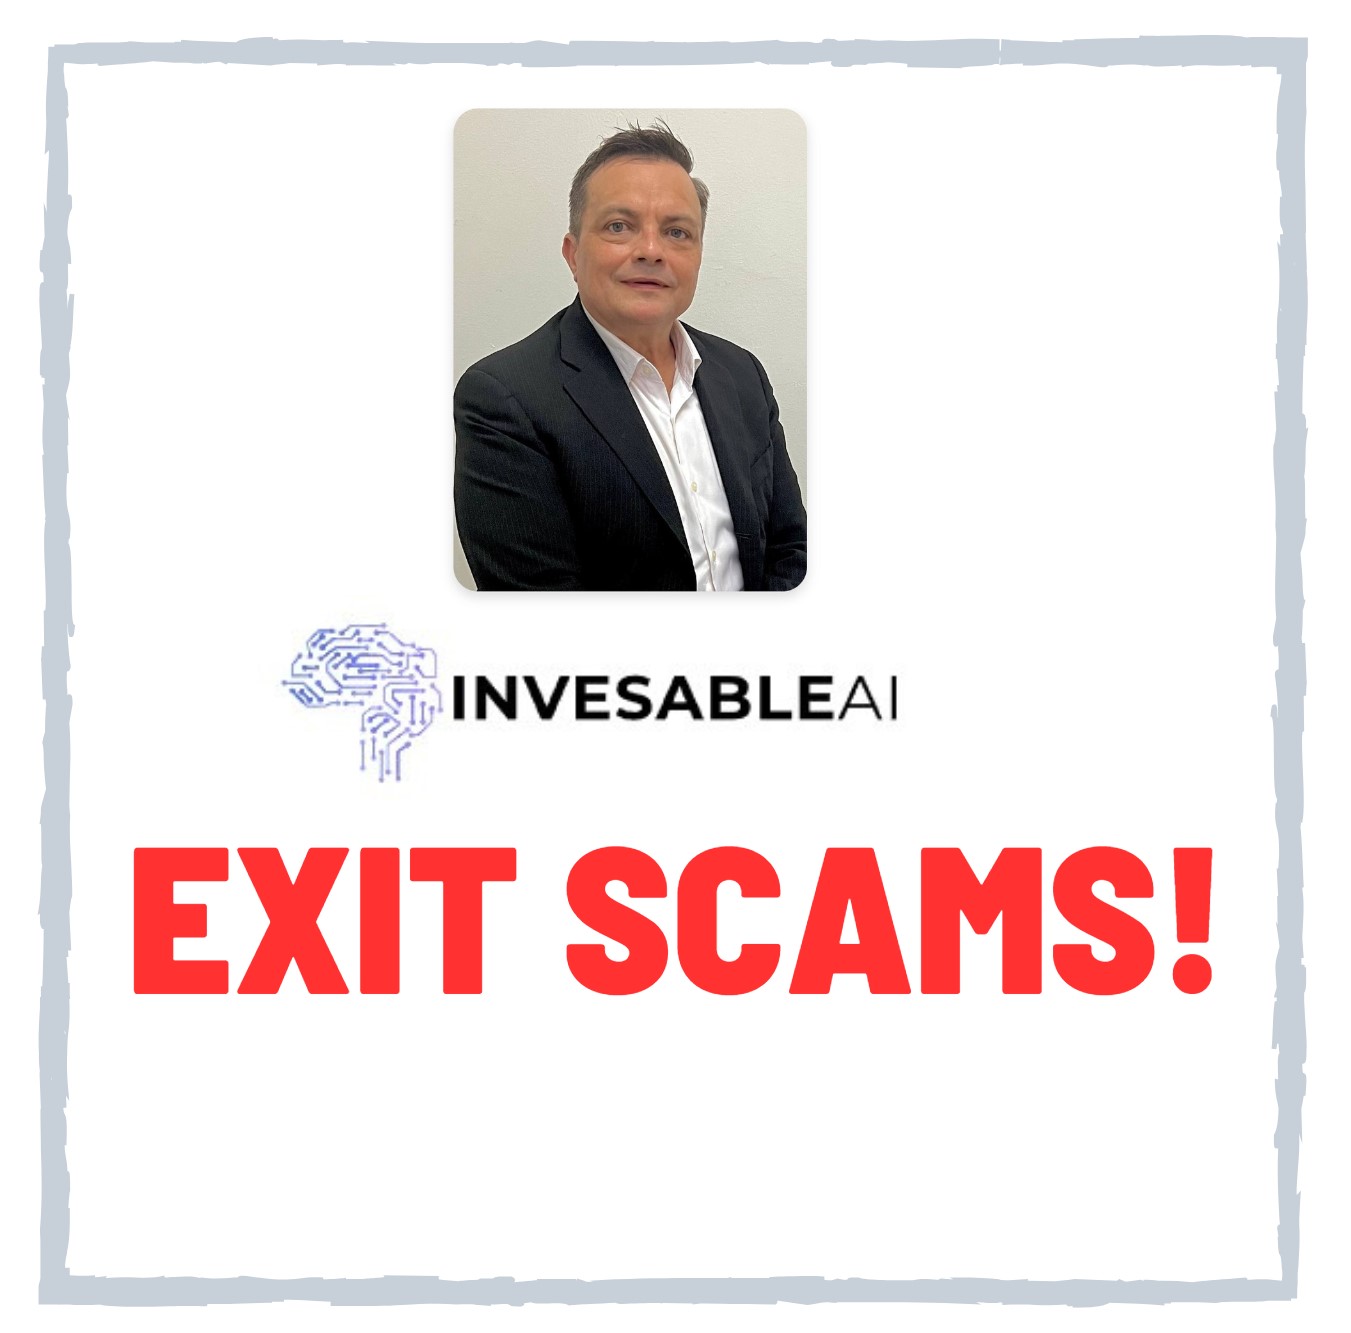 InvesableAI Exit Scams & Collapses, Withdrawals Disabled [Game Over]